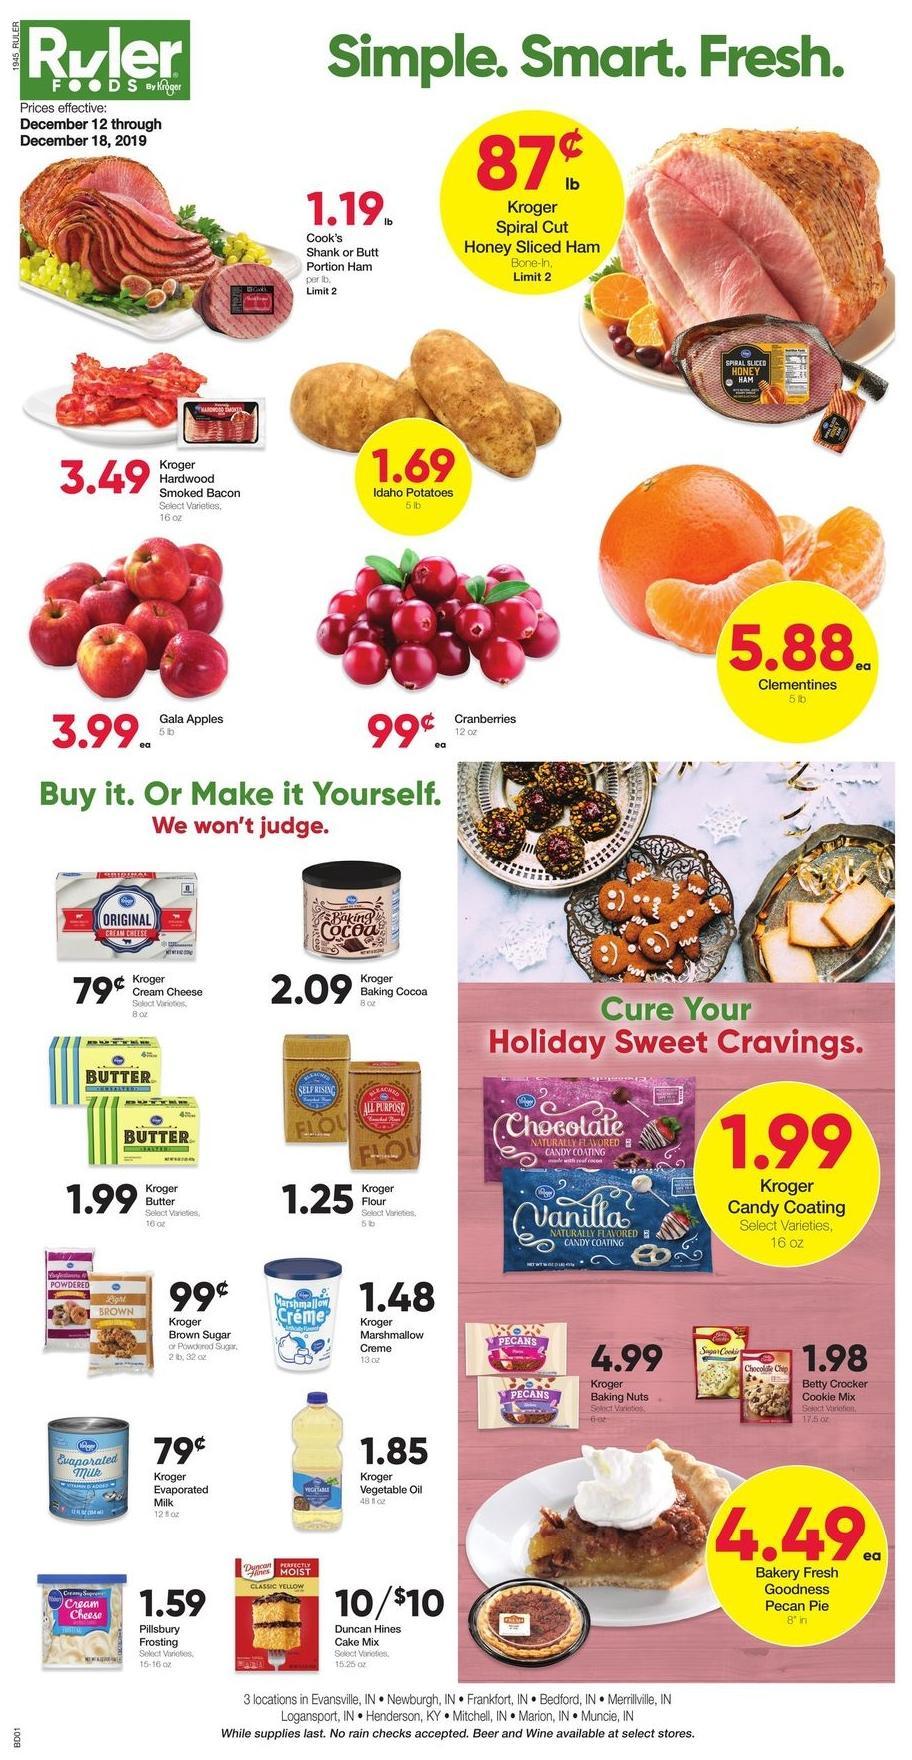 Ruler Foods Weekly Ad from December 12